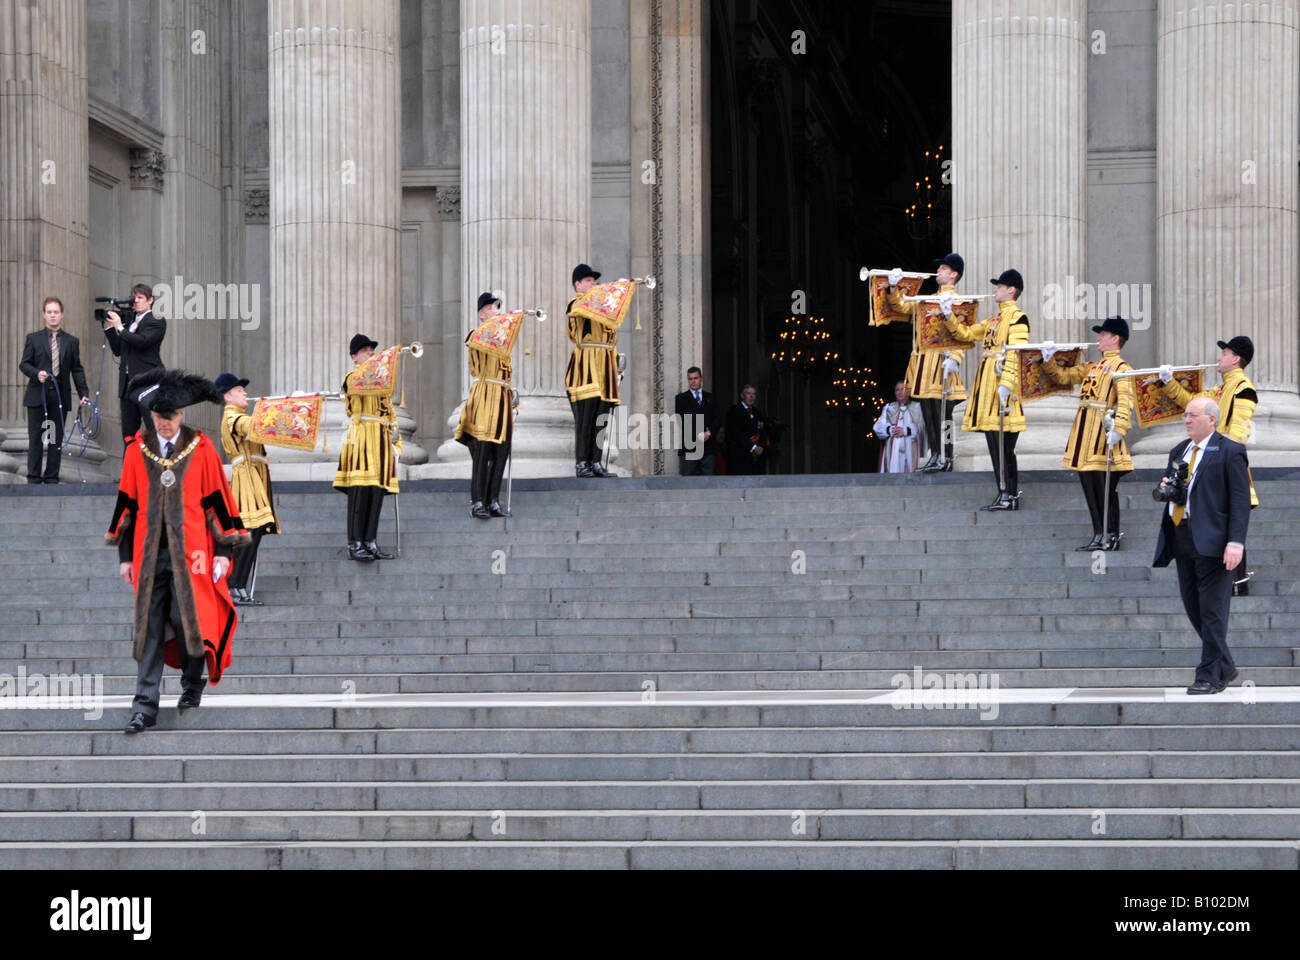 Trumpeter of The Life Guards in State Dress playing fanfare at St Pauls Cathedral Lord Mayor London walking to greet Prince Phillip City of London UK Stock Photo